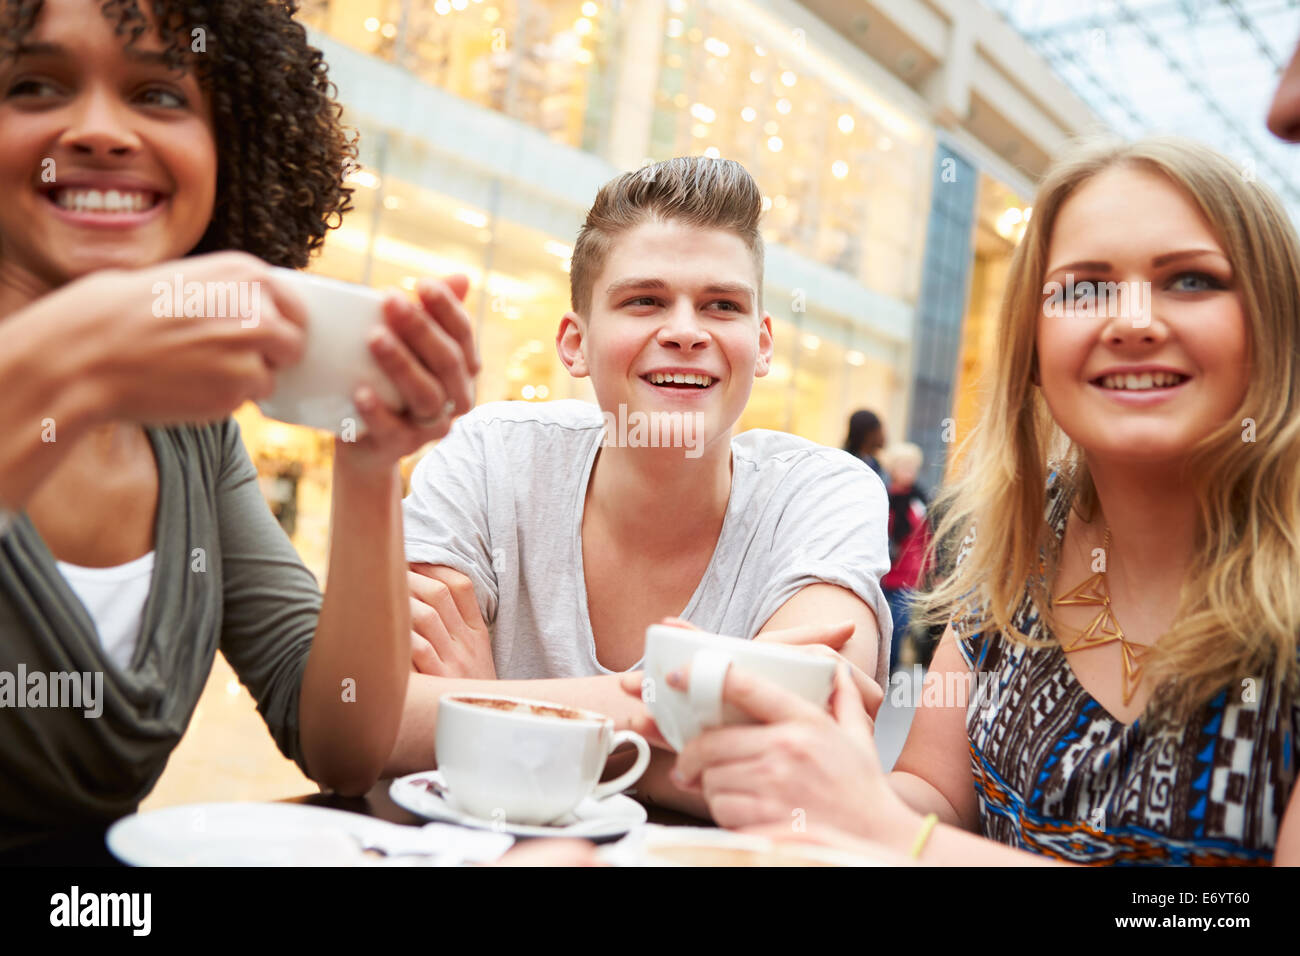 Group Of Young Friends Meeting In Café Stock Photo